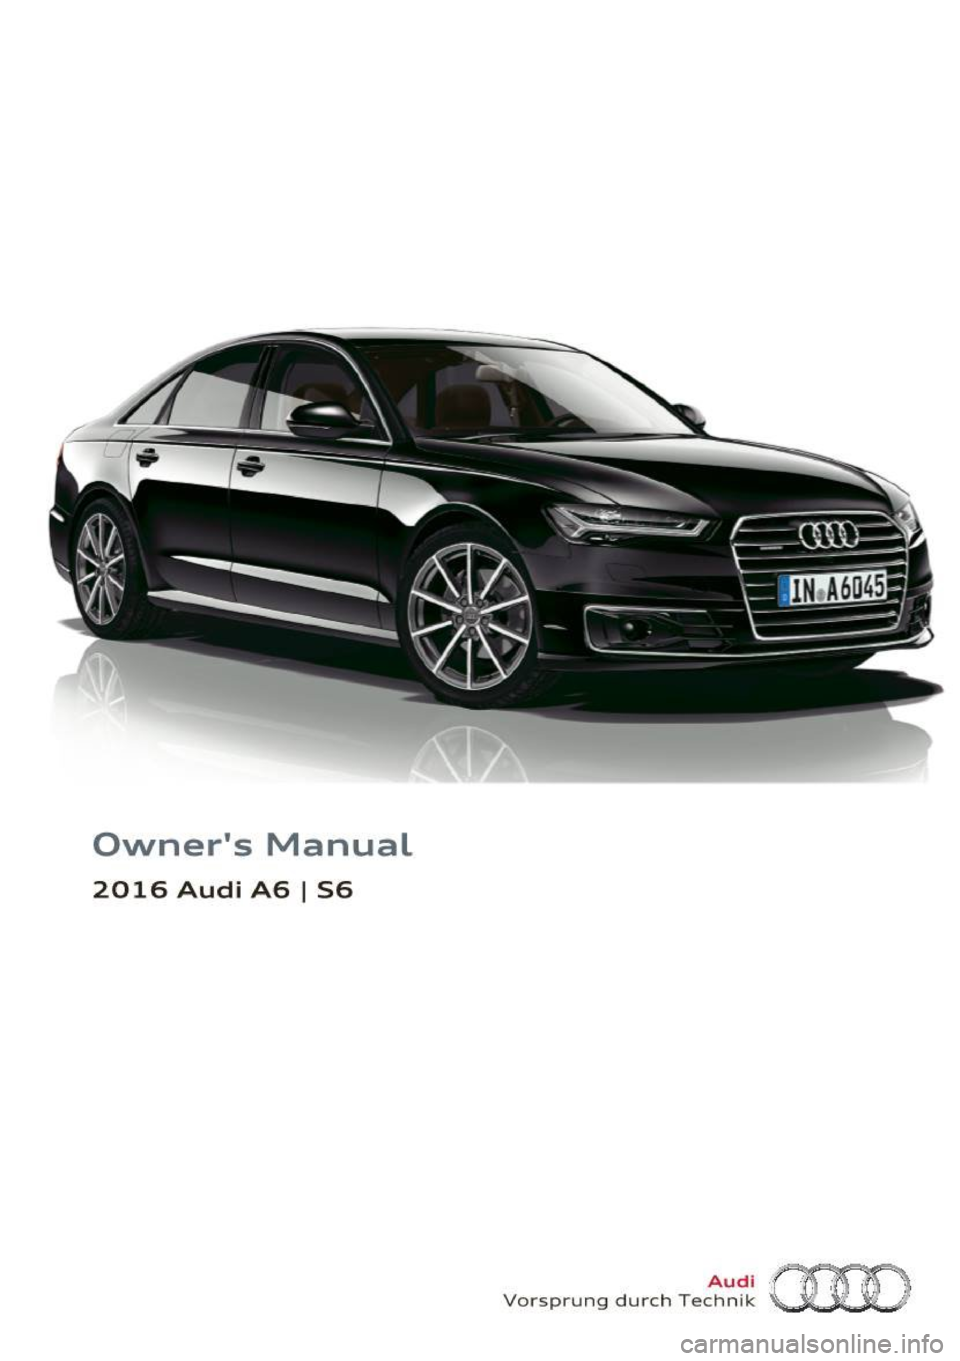 AUDI S6 2016  Owners Manual owners Manual 
2016 Audi A6 
I S6  